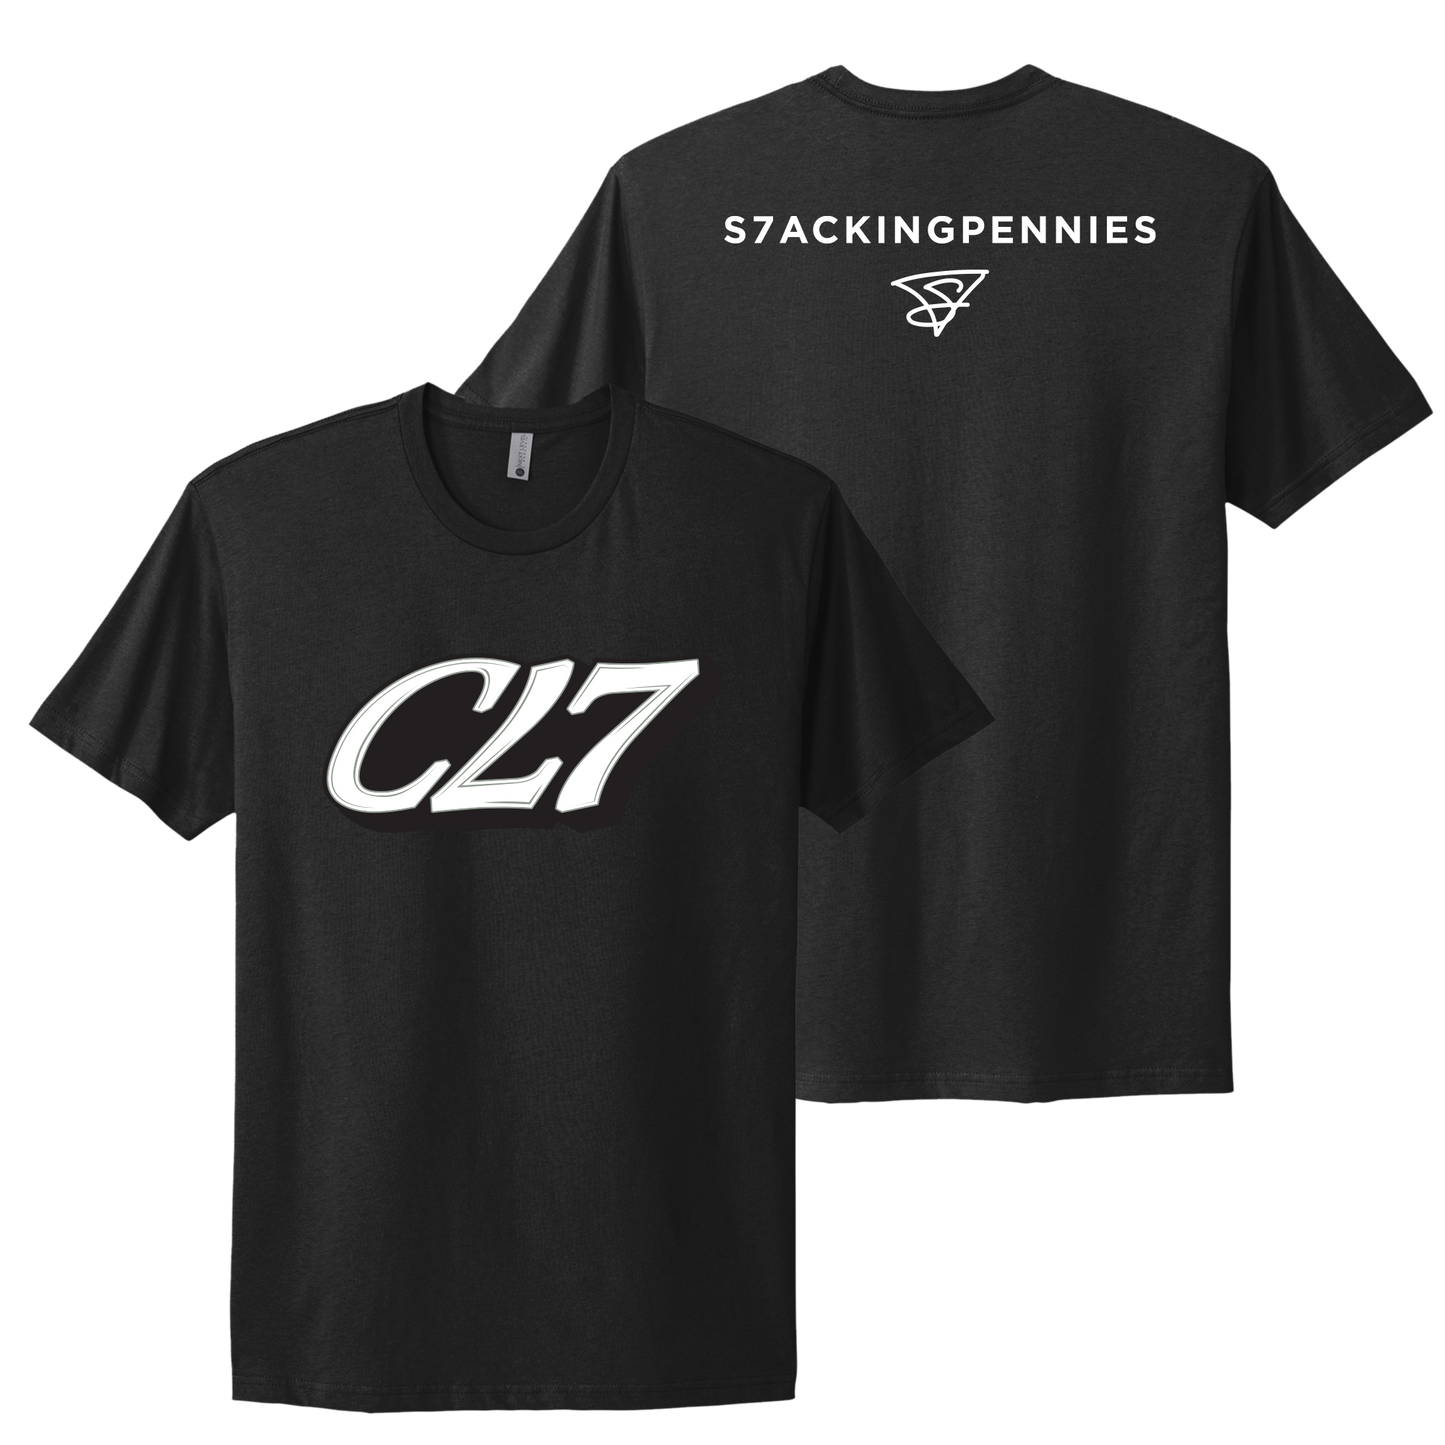 Corey LaJoie CL7 Stacking Pennies Tee